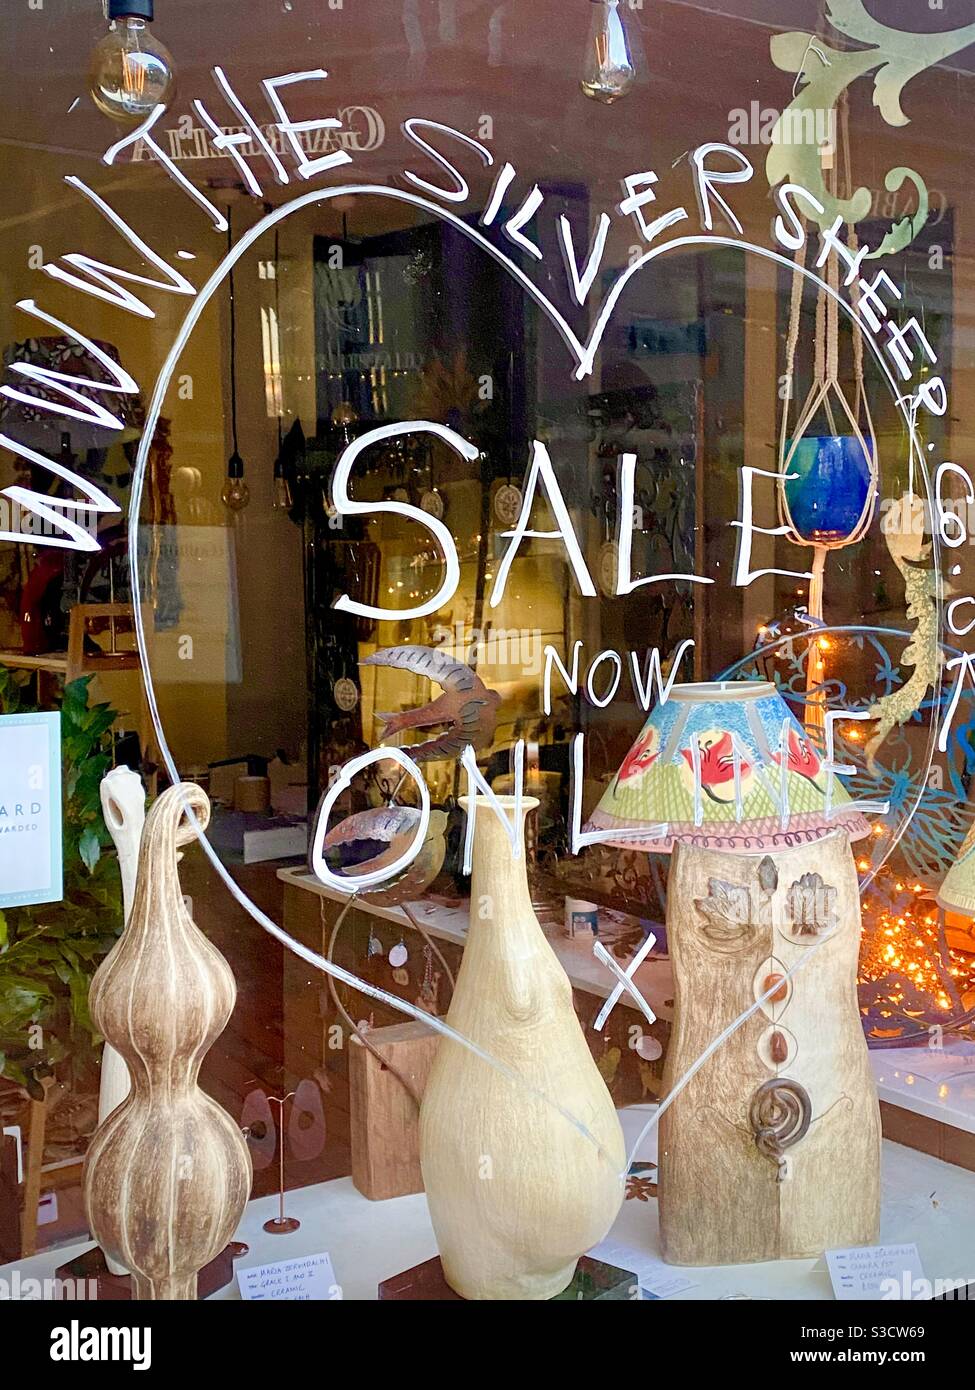 Shop Window situated in Chapel Place Tunbridge Wells England - promoting a SALE ONLINE of pottery and woollen garments during the 2019/2020 Pandemic Lockdown. Heart Valentine promotion via Internet. Stock Photo